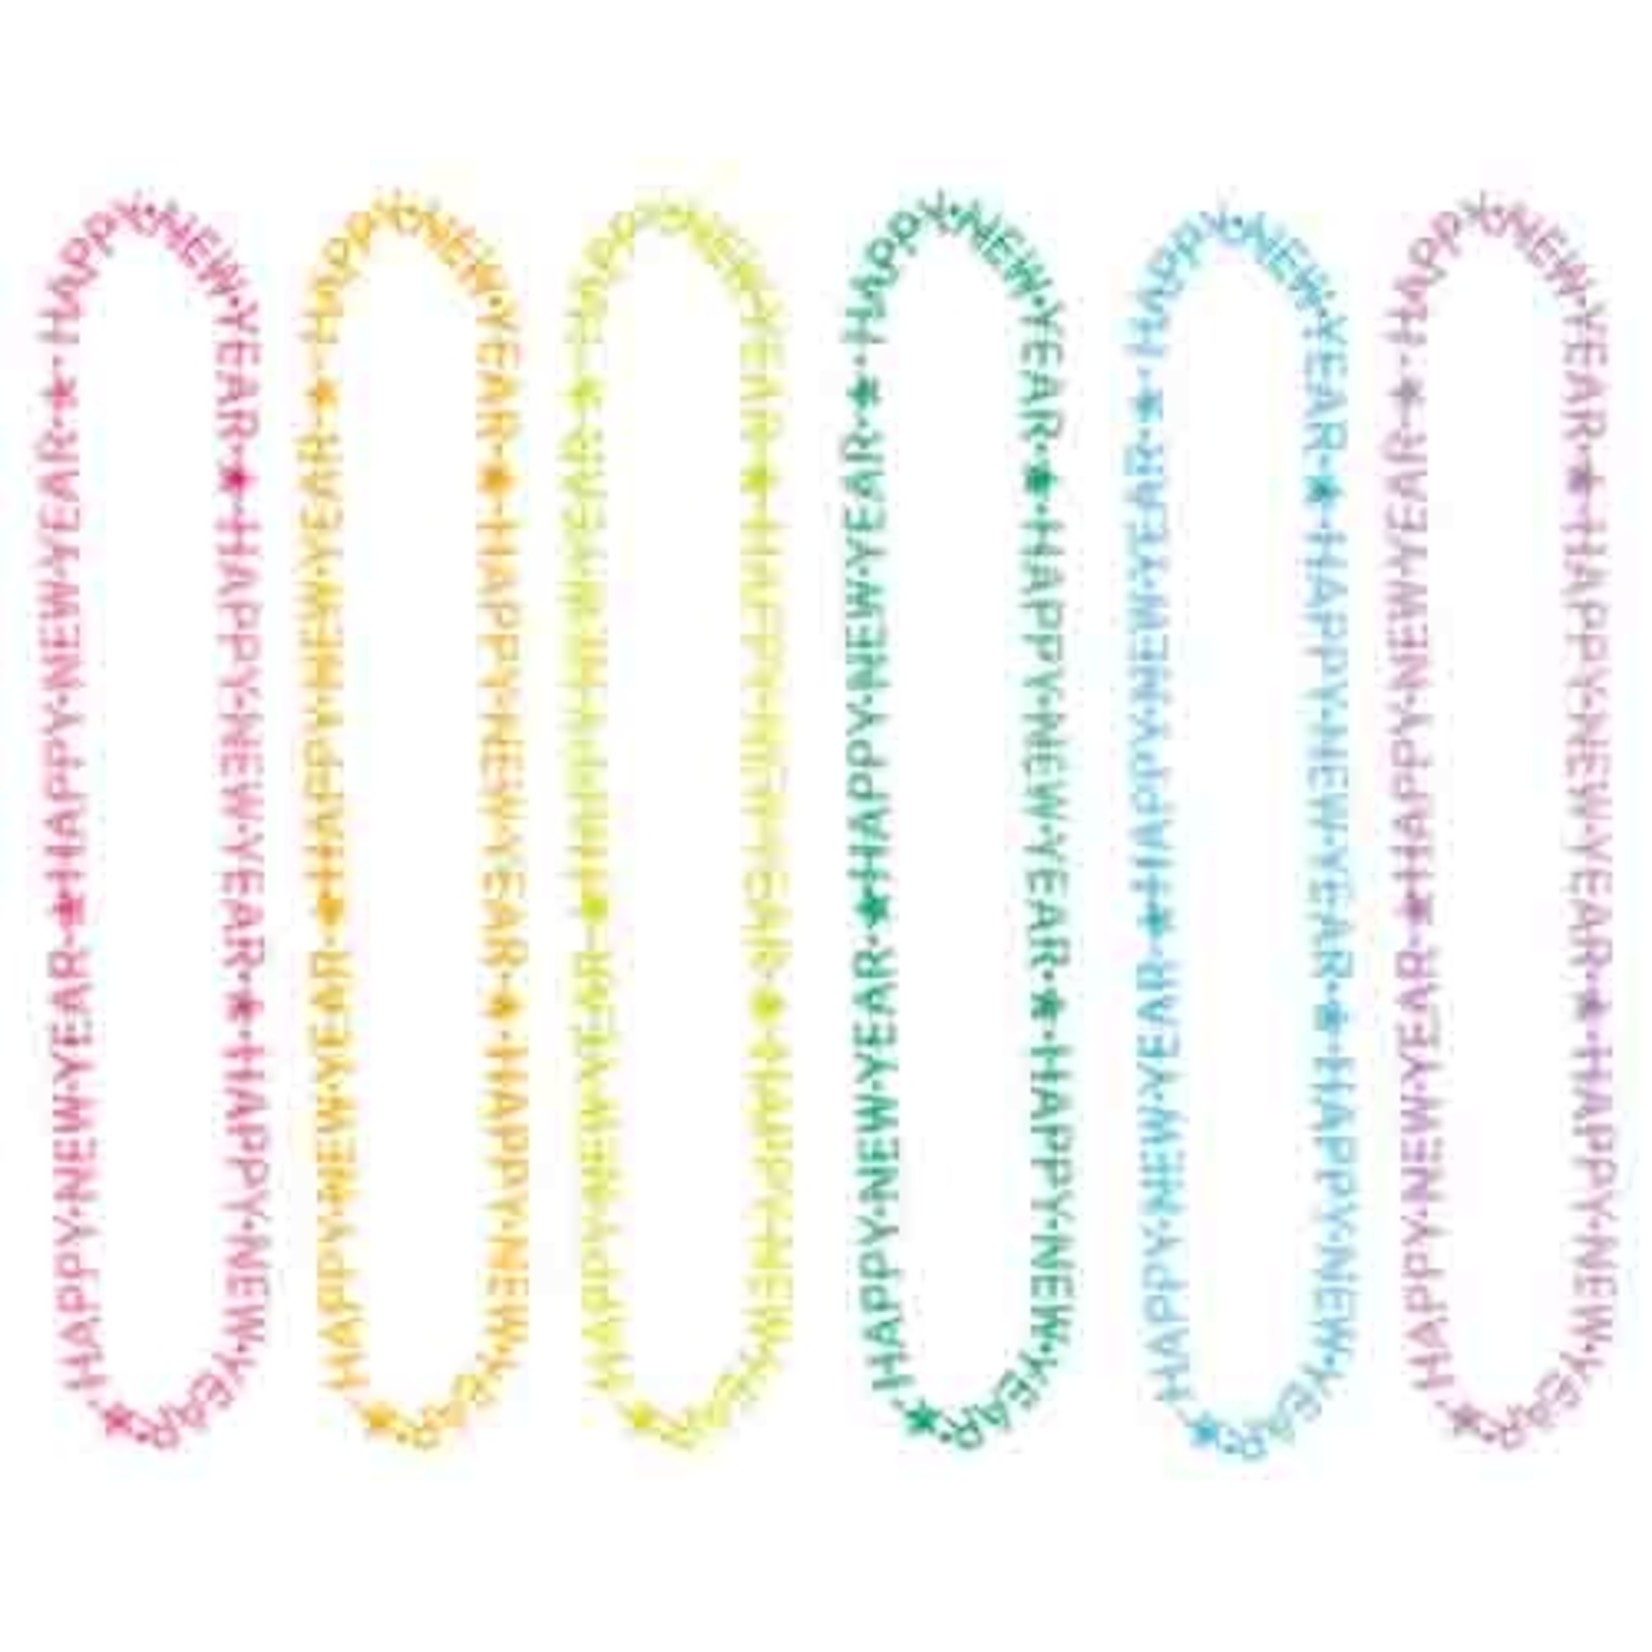 Amscan Happy New Year's Glow-In-Dark Necklaces - 6ct.